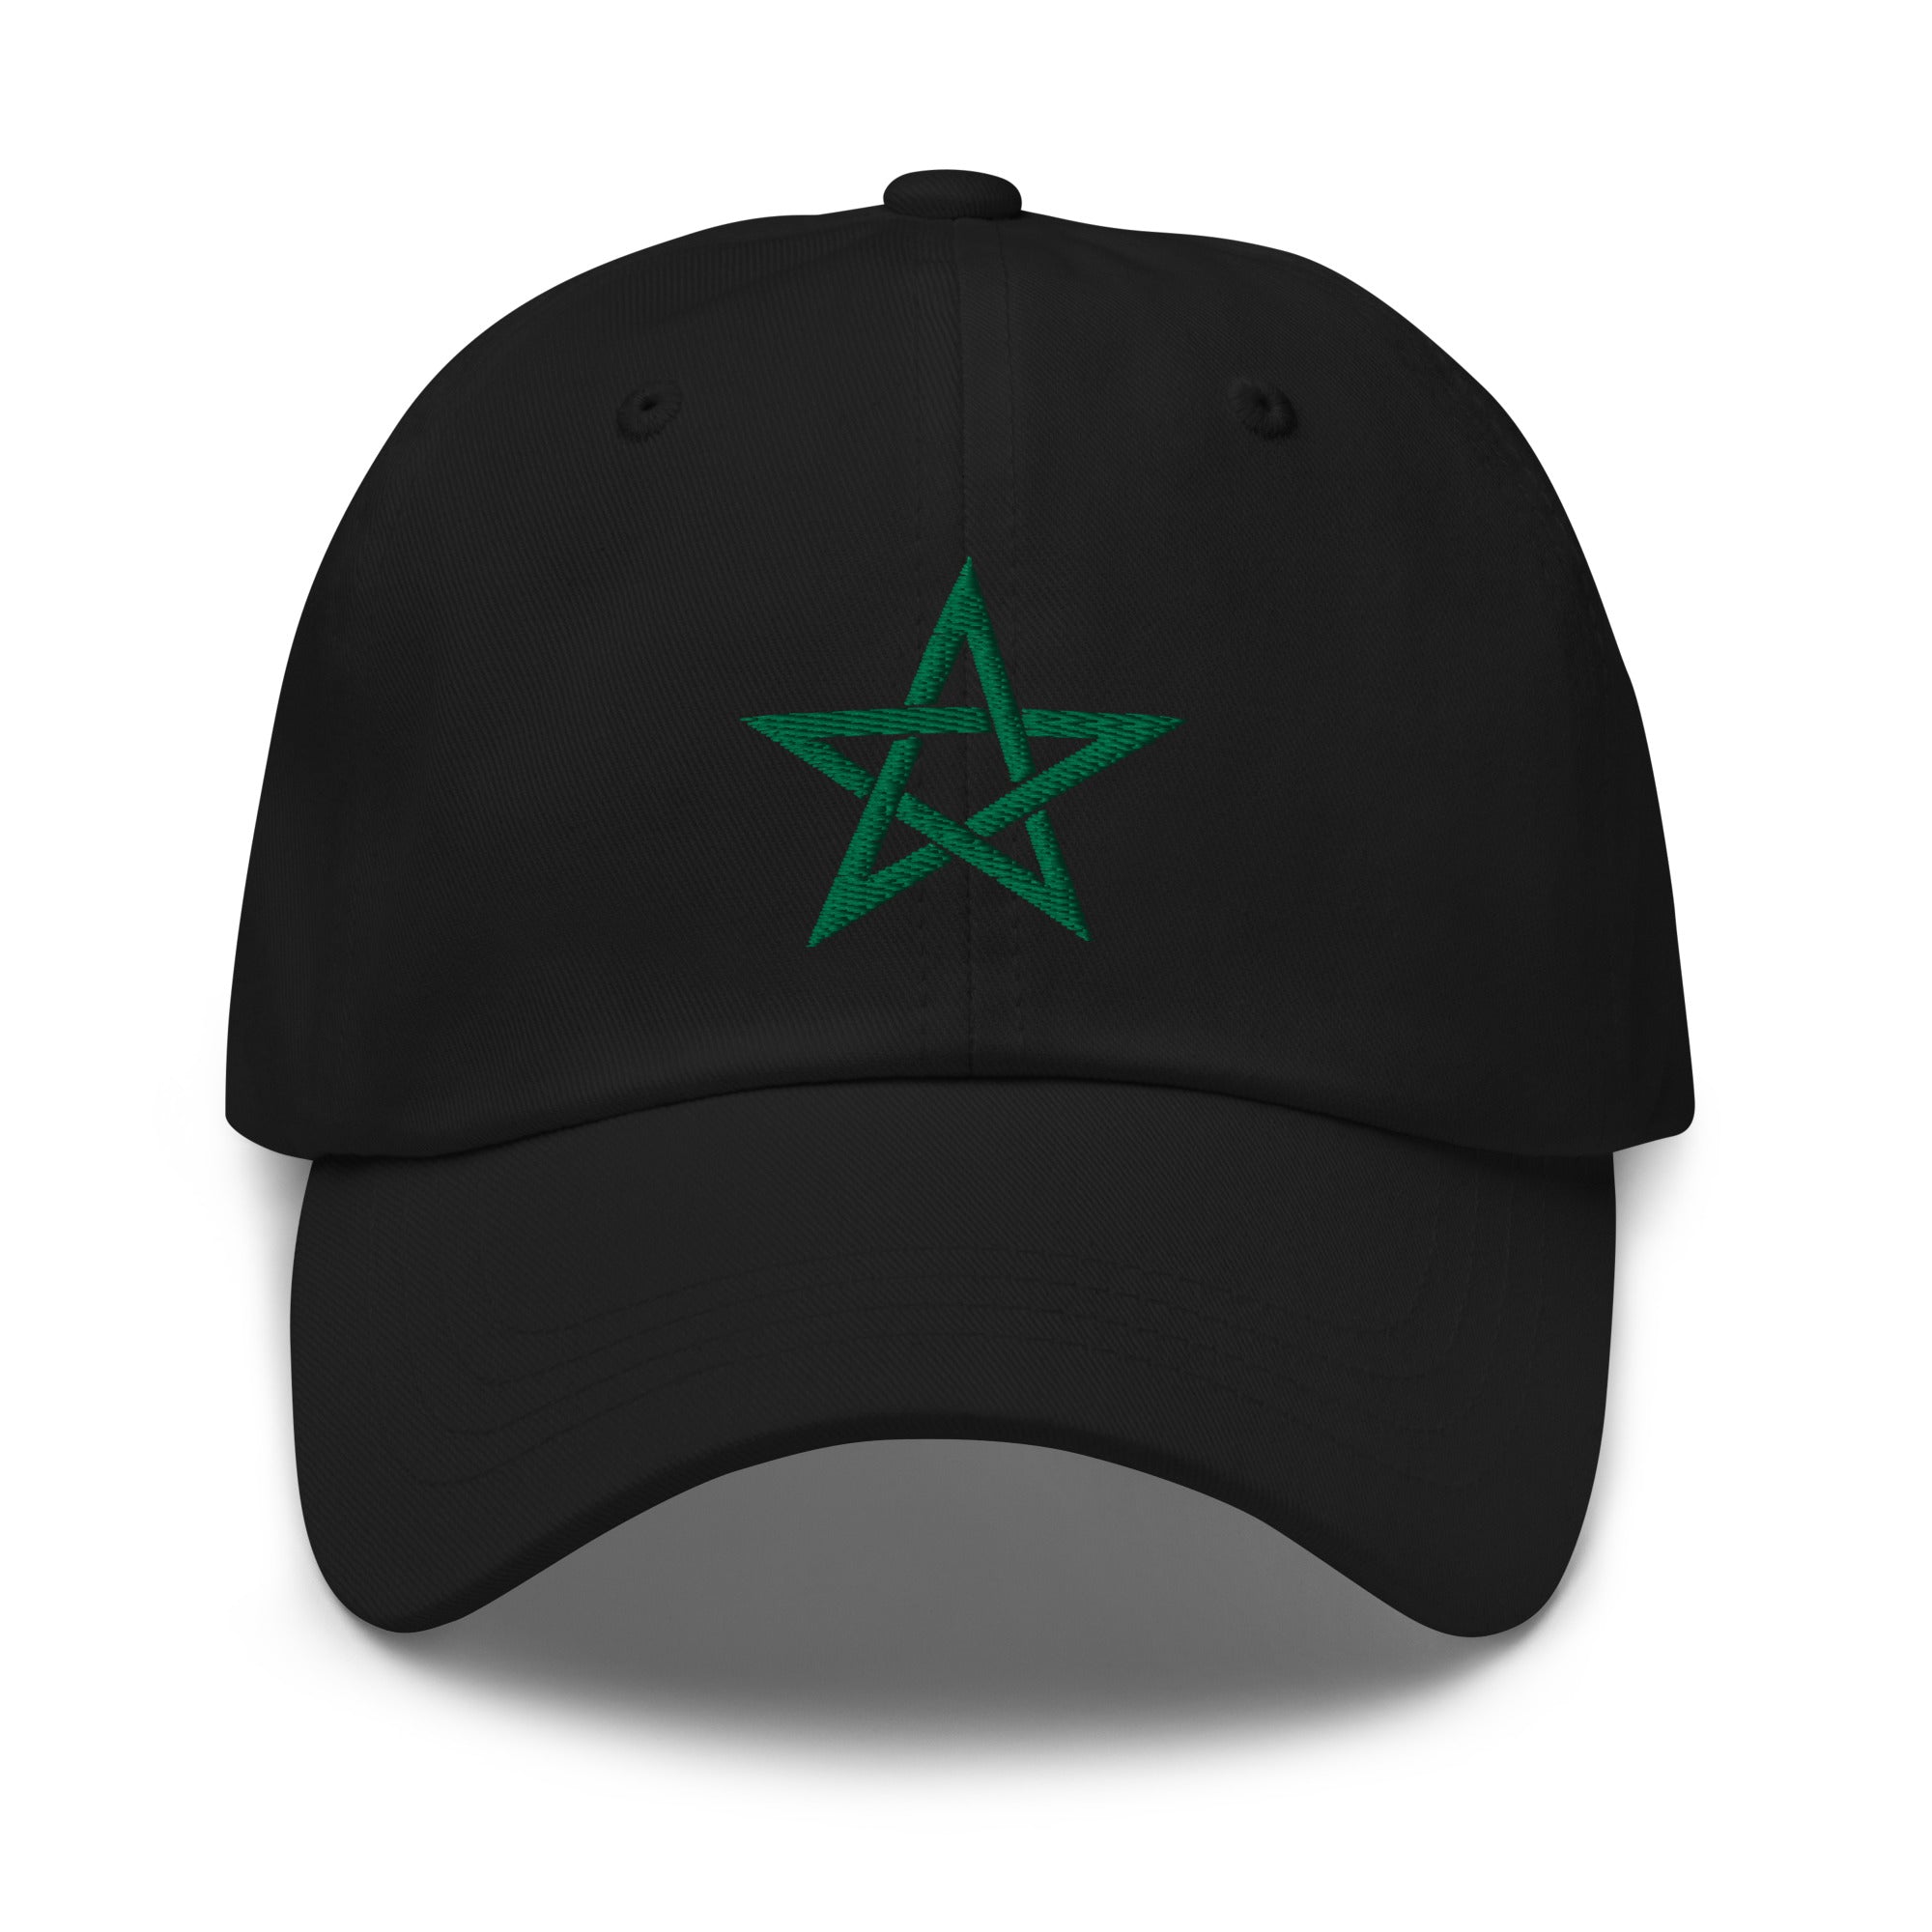 Wiccan Woven Pentagram Symbol Embroidered Baseball Cap 5 Point Star Dad hat - Edge of Life Designs